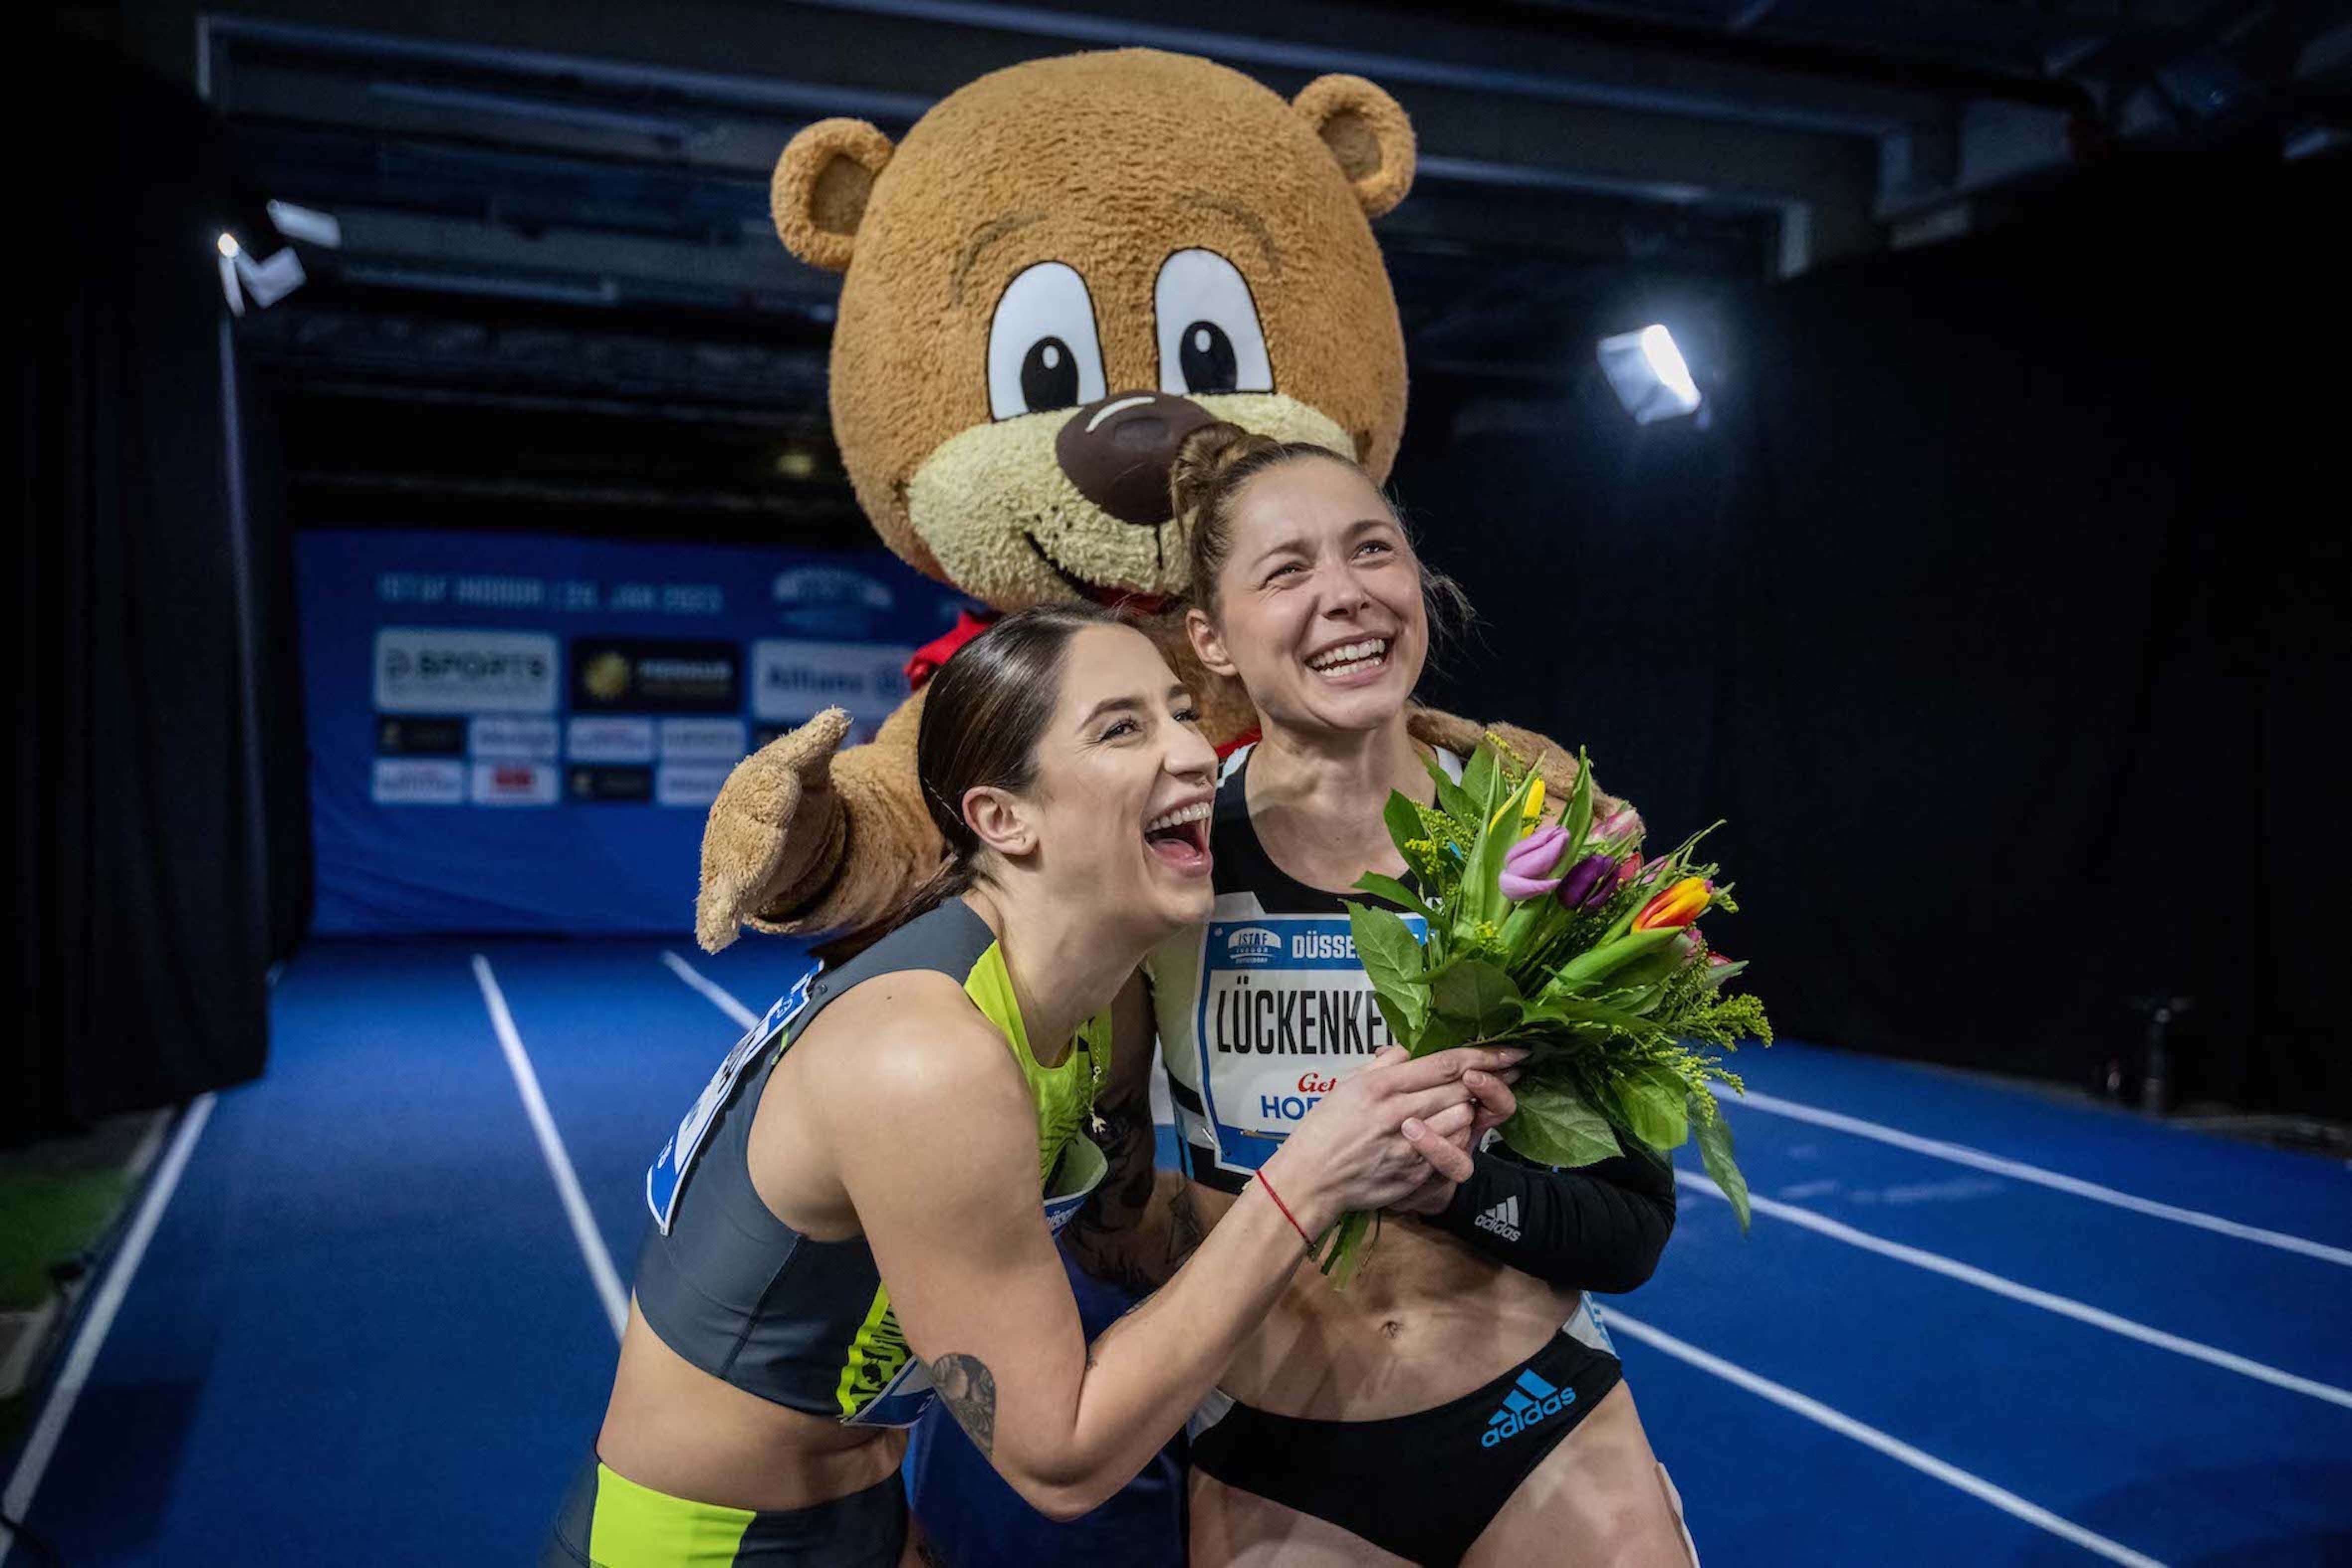 Ewa Swoboda and Gina Luckenkemper after the 60m final at the ISTAF Indoor meeting in Dusseldorf